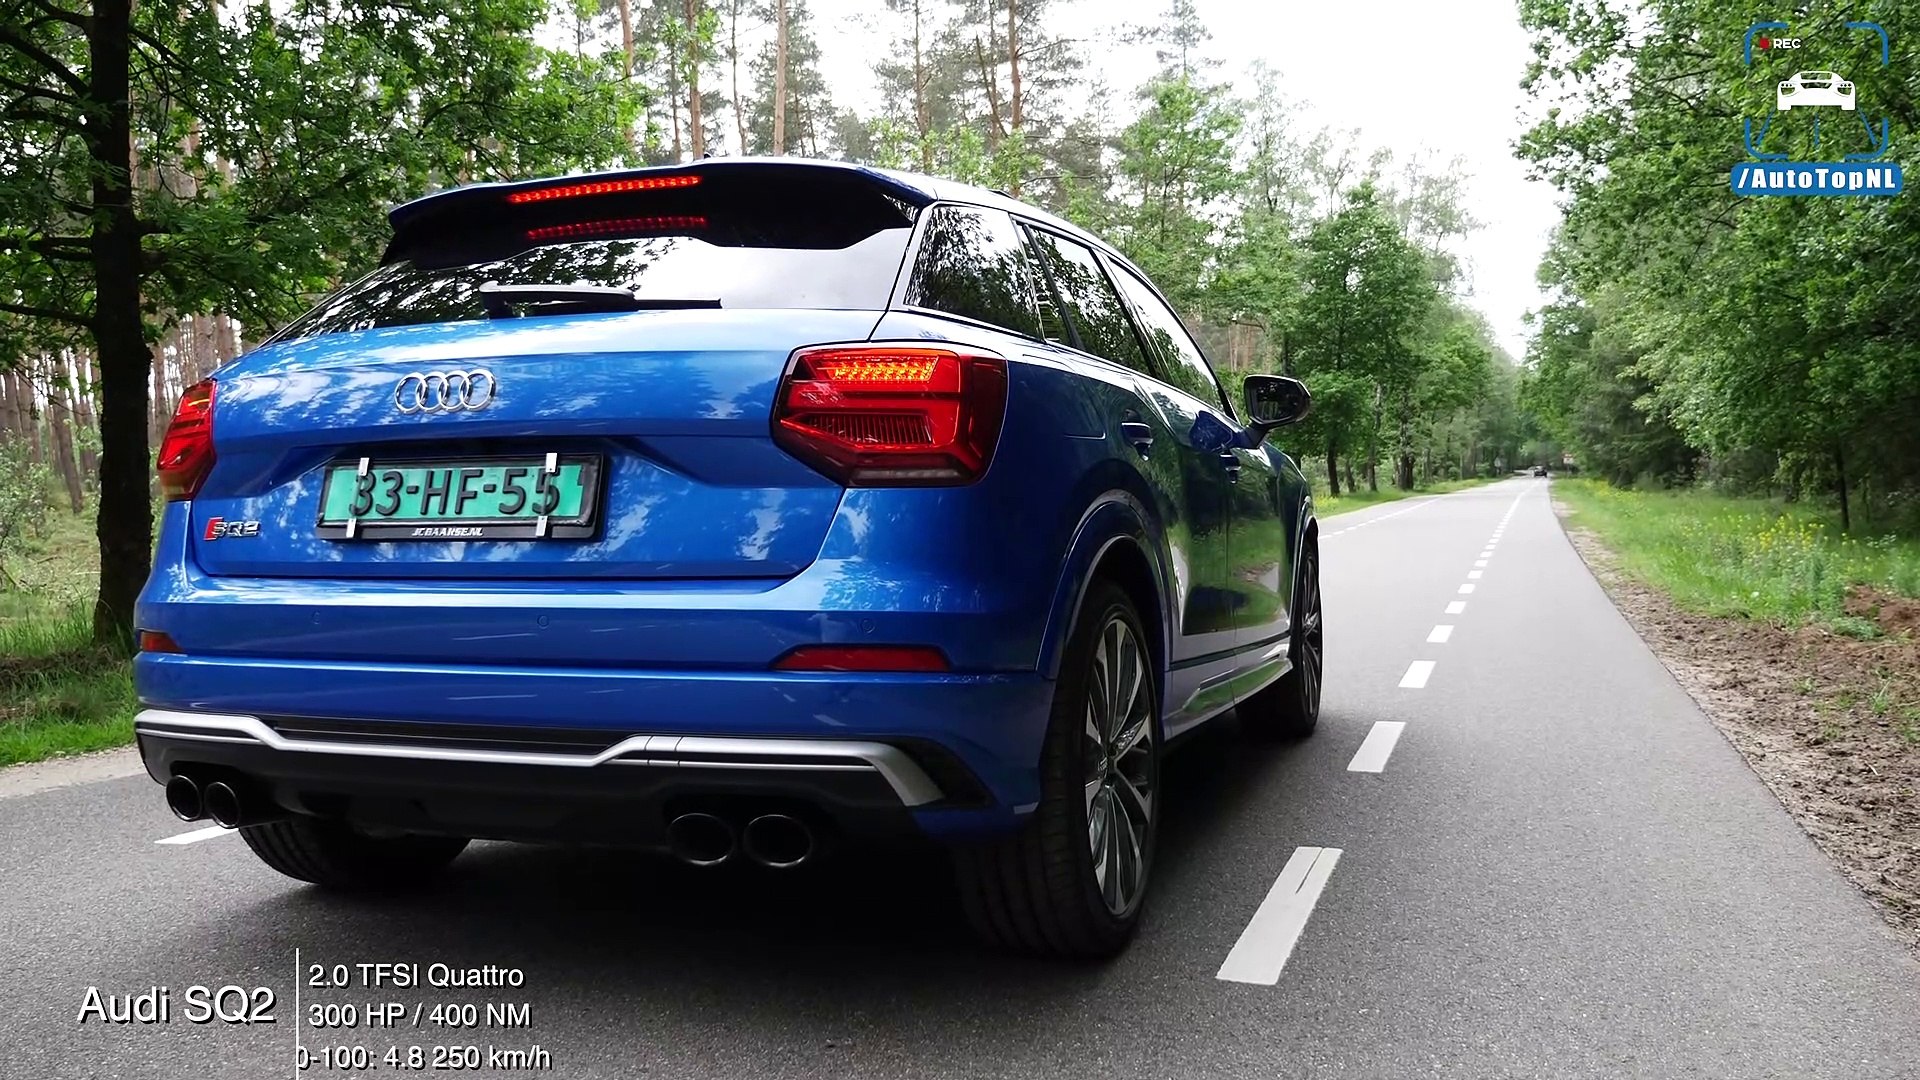 NEW! Audi SQ2 2.0 TFSI QUATTRO Exhaust SOUND & ONBOARD by AutoTopNL